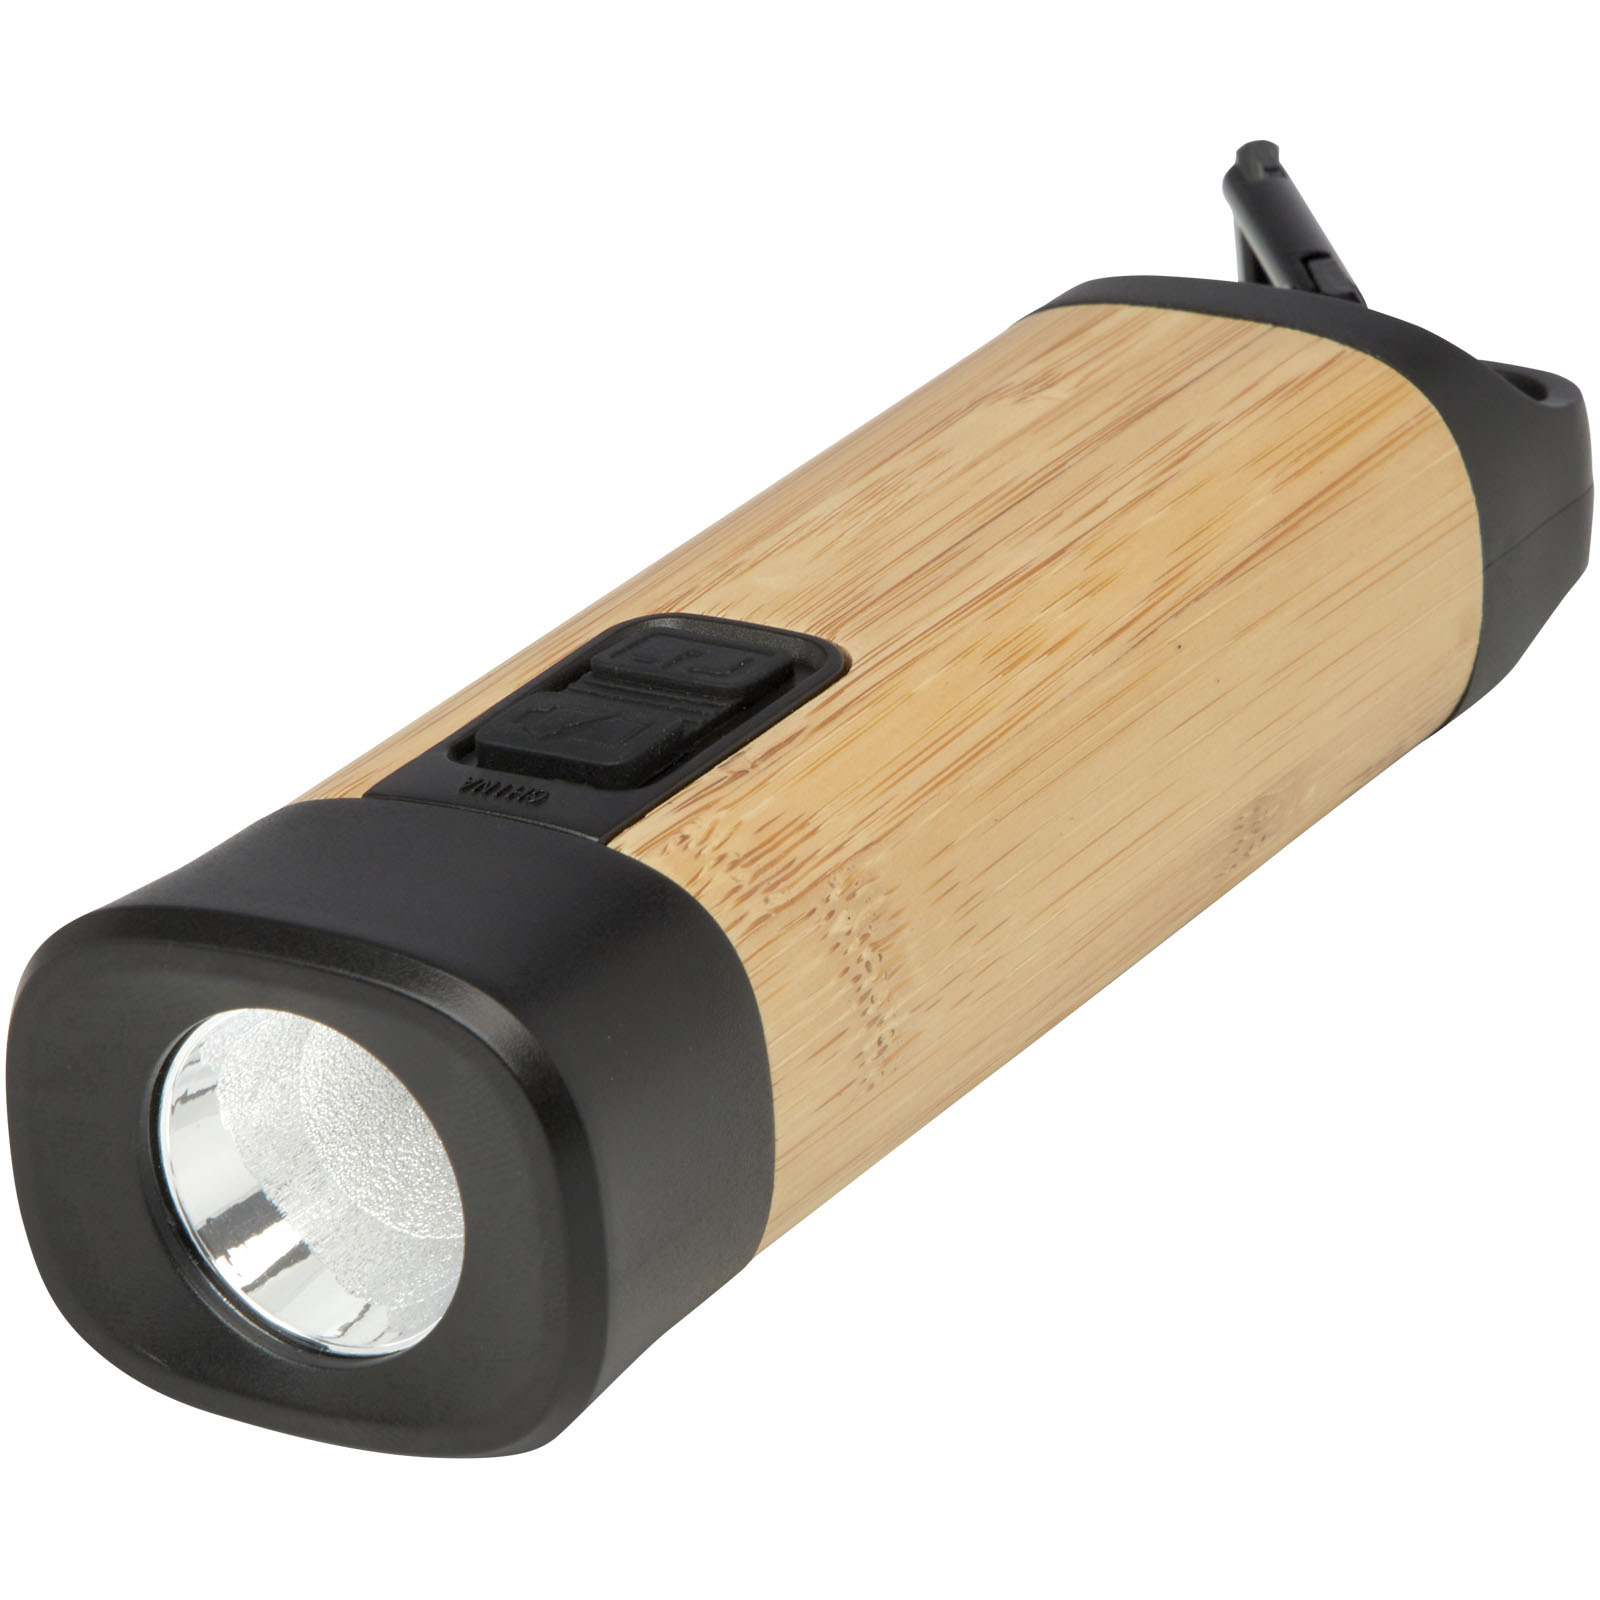 Advertising Lamps - Kuma bamboo/RCS recycled plastic torch with carabiner